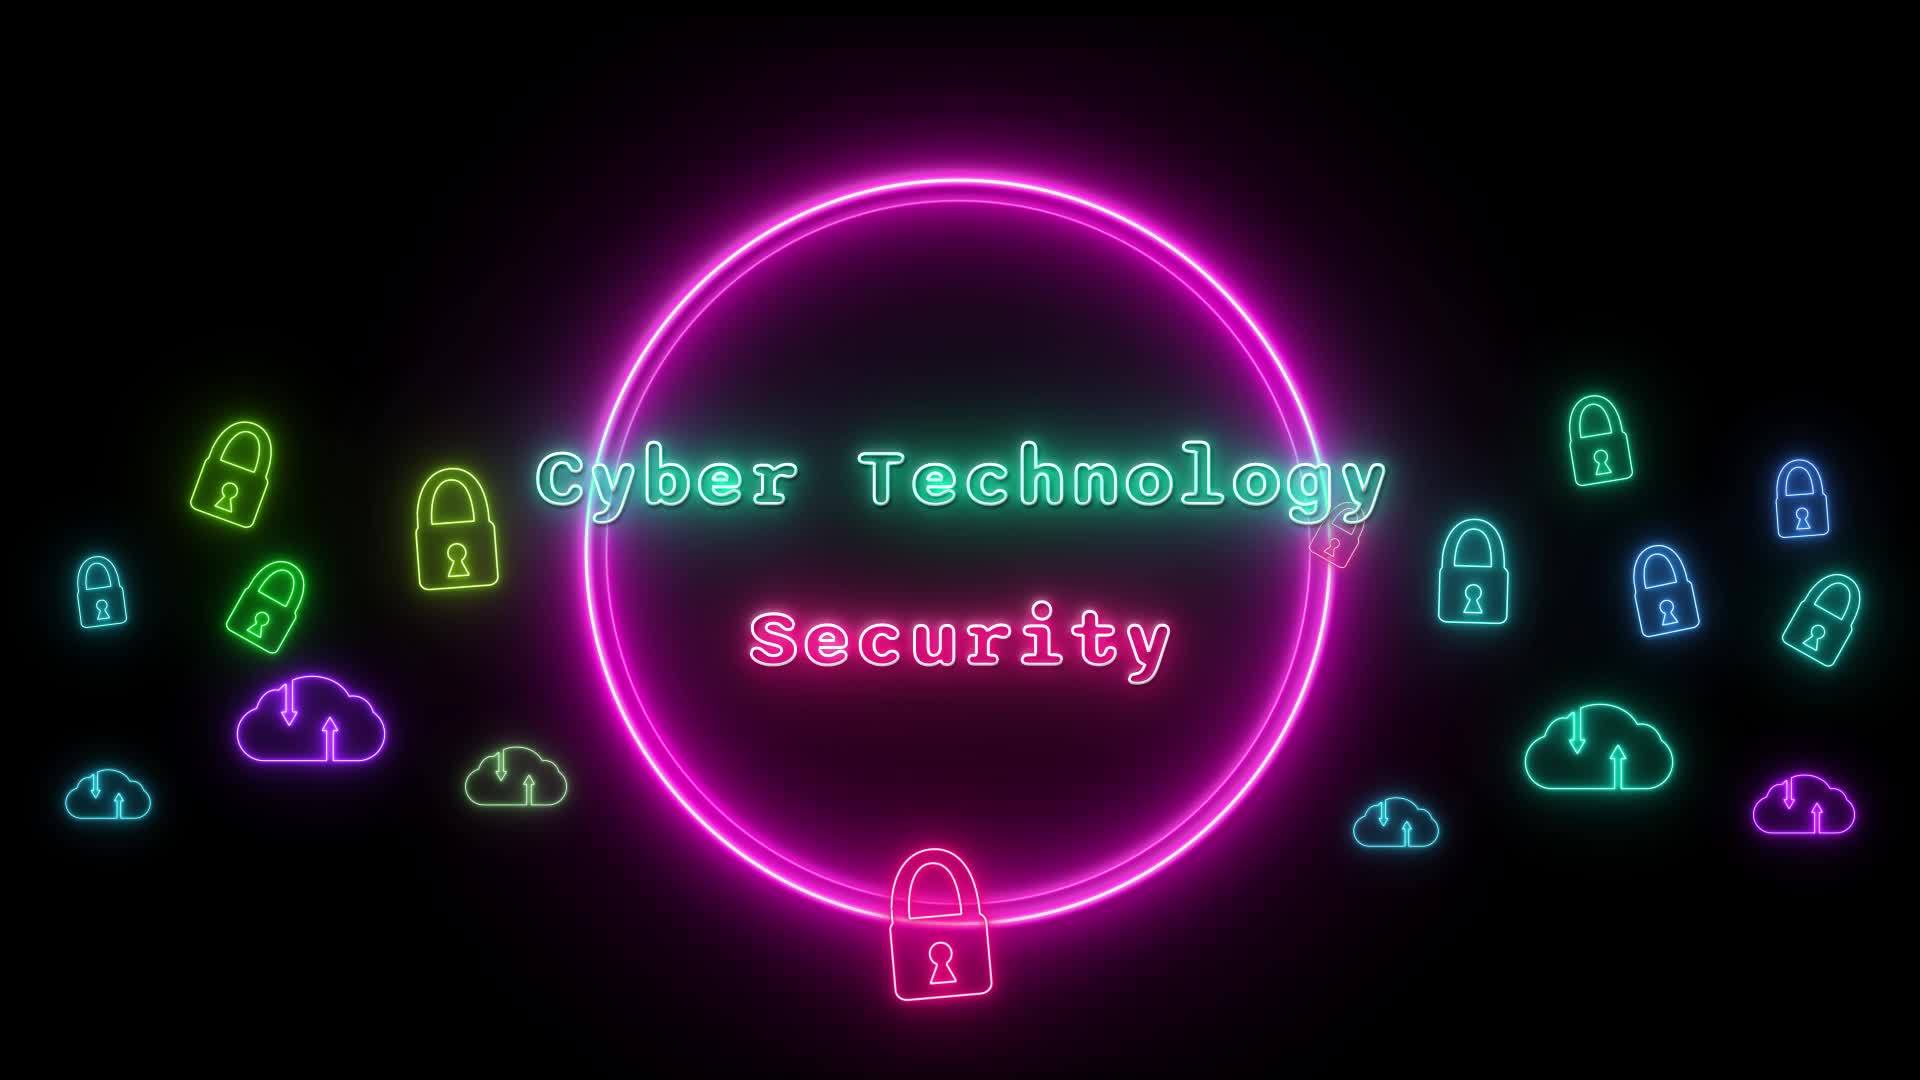 Cyber Technology Security Neon Green Pink Fluorescent Text Animation Blue Frame On Black 